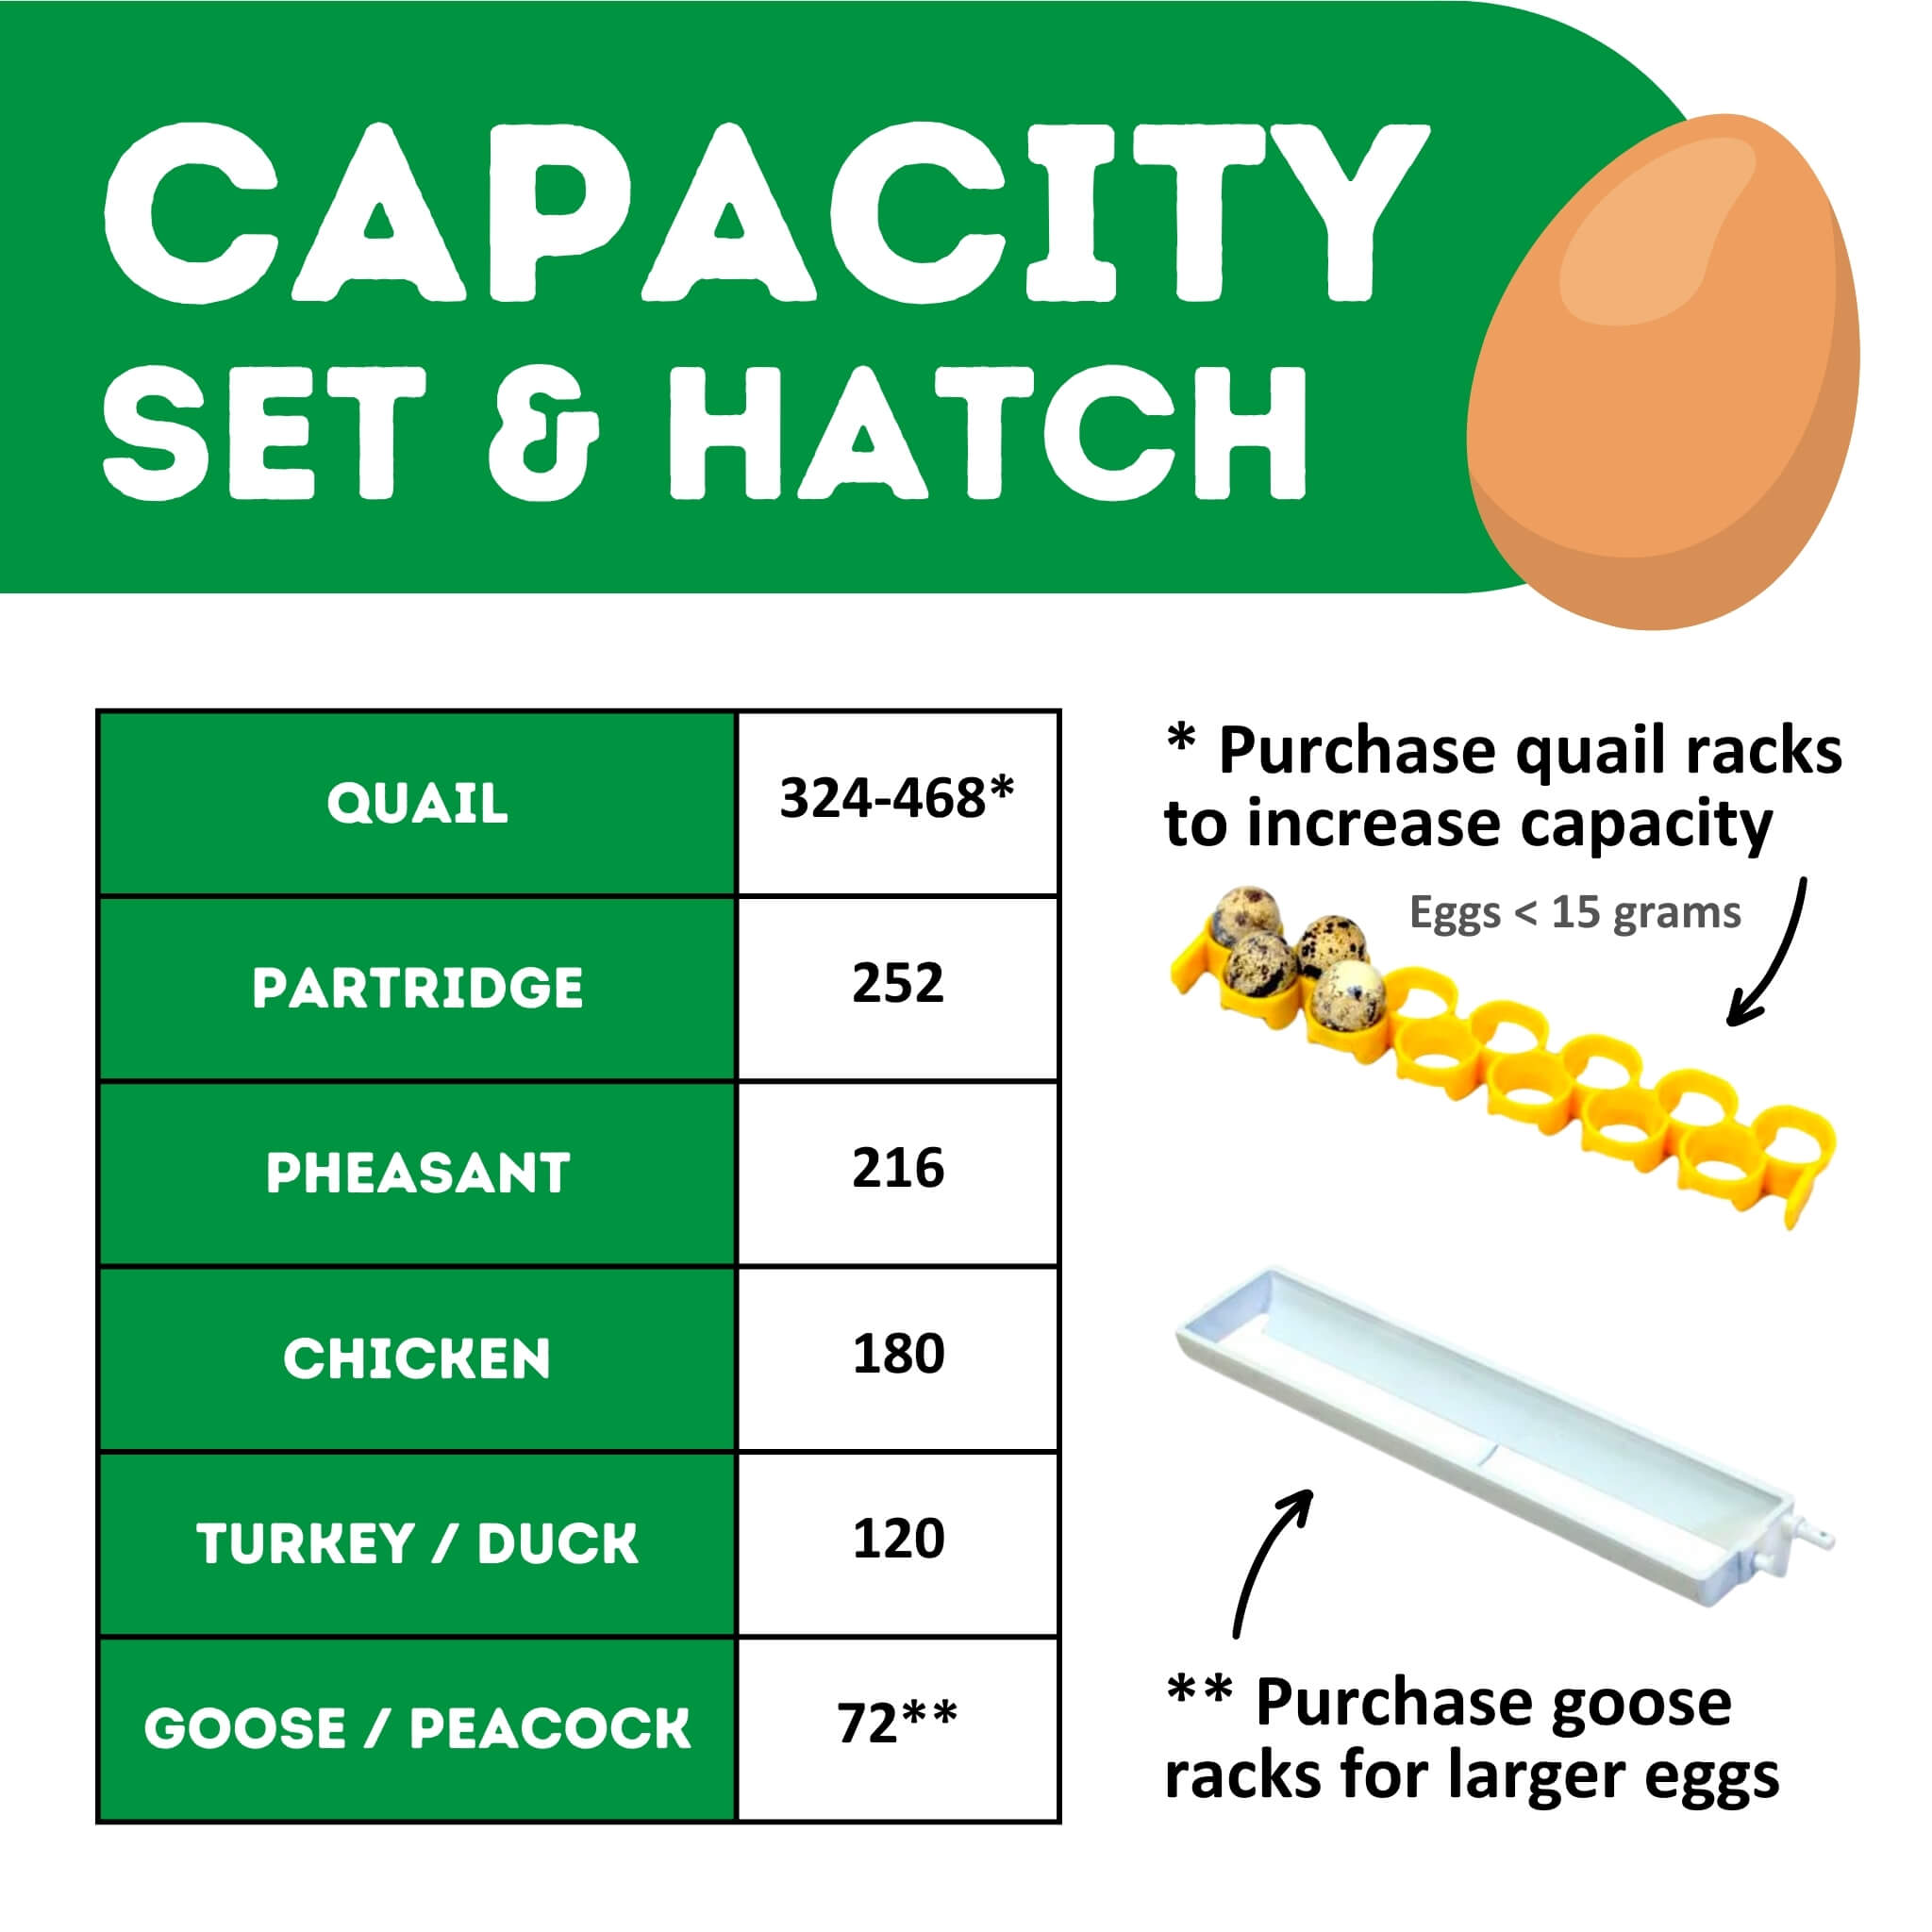 Hatching Time Cimuka CT180 infographic shows the set & hatch capacity of incubator. Incubator can hold up to 468 Quail eggs, 252 Partridge eggs, 216 Pheasant eggs, 180 chicken eggs, 120 turkey or duck eggs or up to 72 Goose/Peacock sized eggs. 2 different racks are shown to be able to increase egg capacity for quail or goose eggs. Must purchase quail or goose egg racks as they are not included.